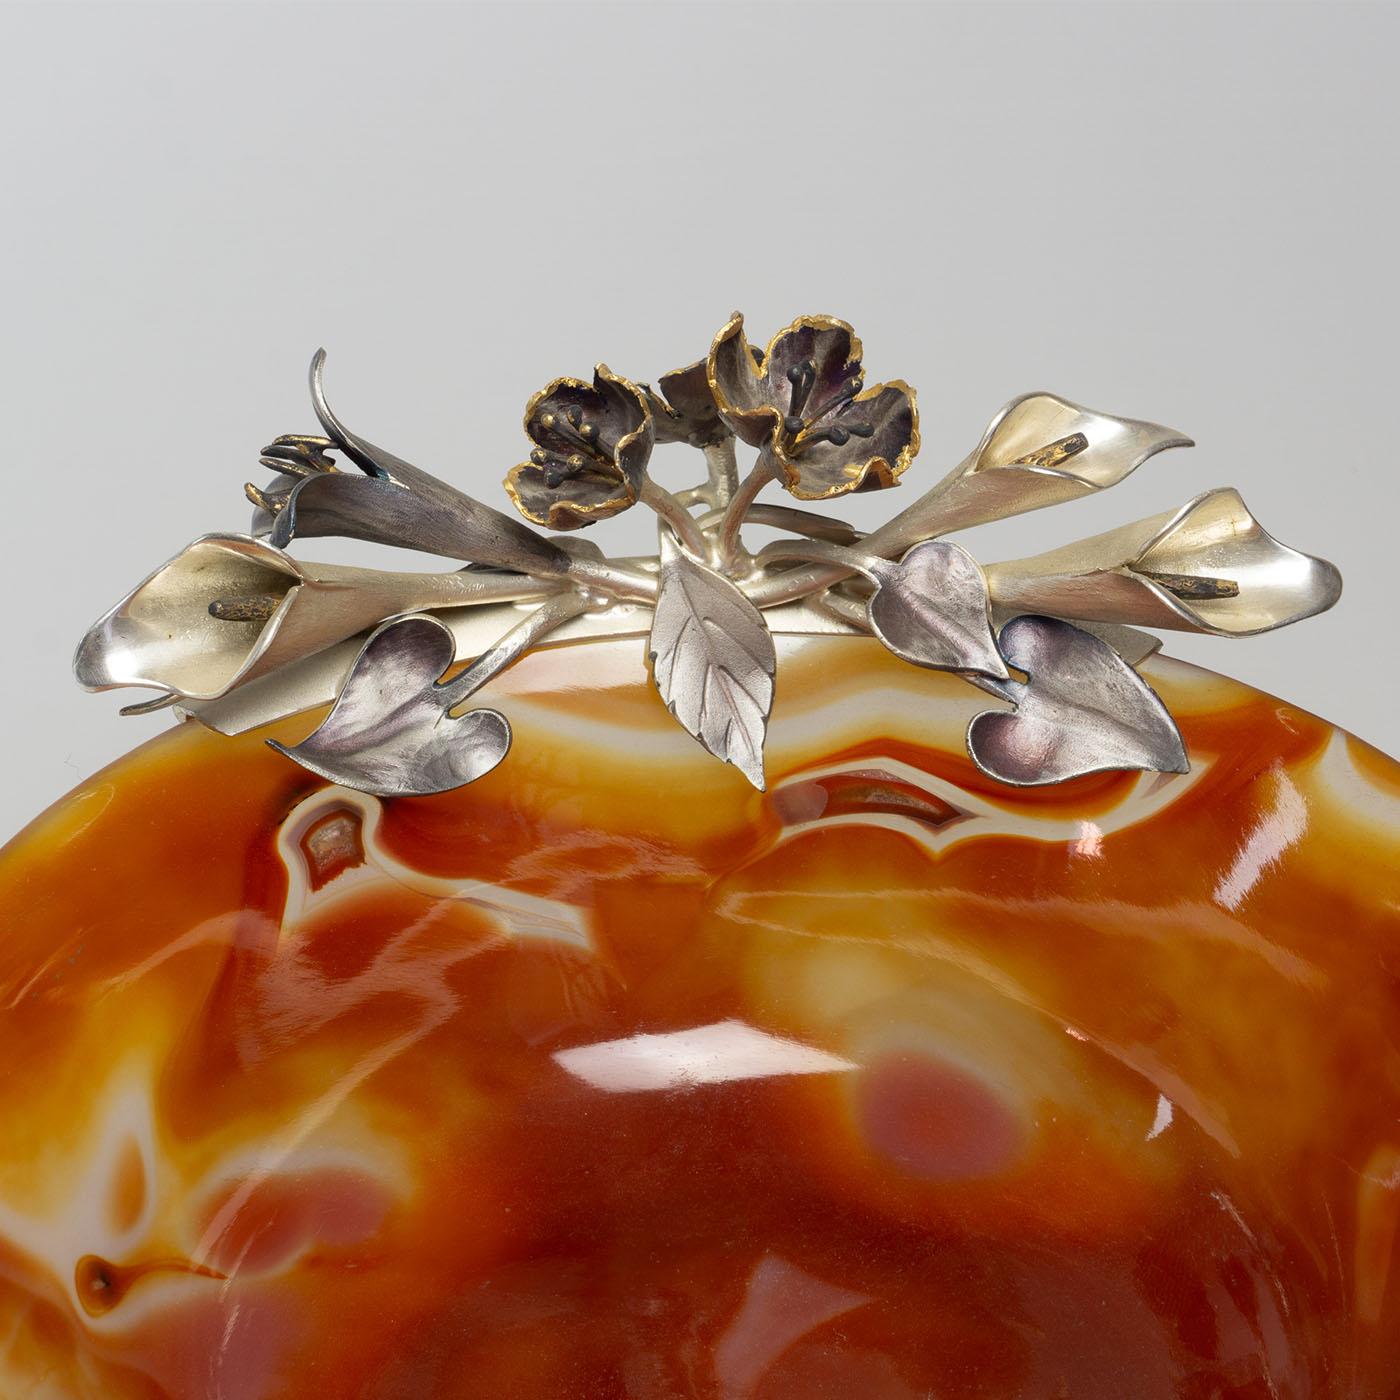 Contemporary Carnelian Agate and Antique Silver Vide Poches